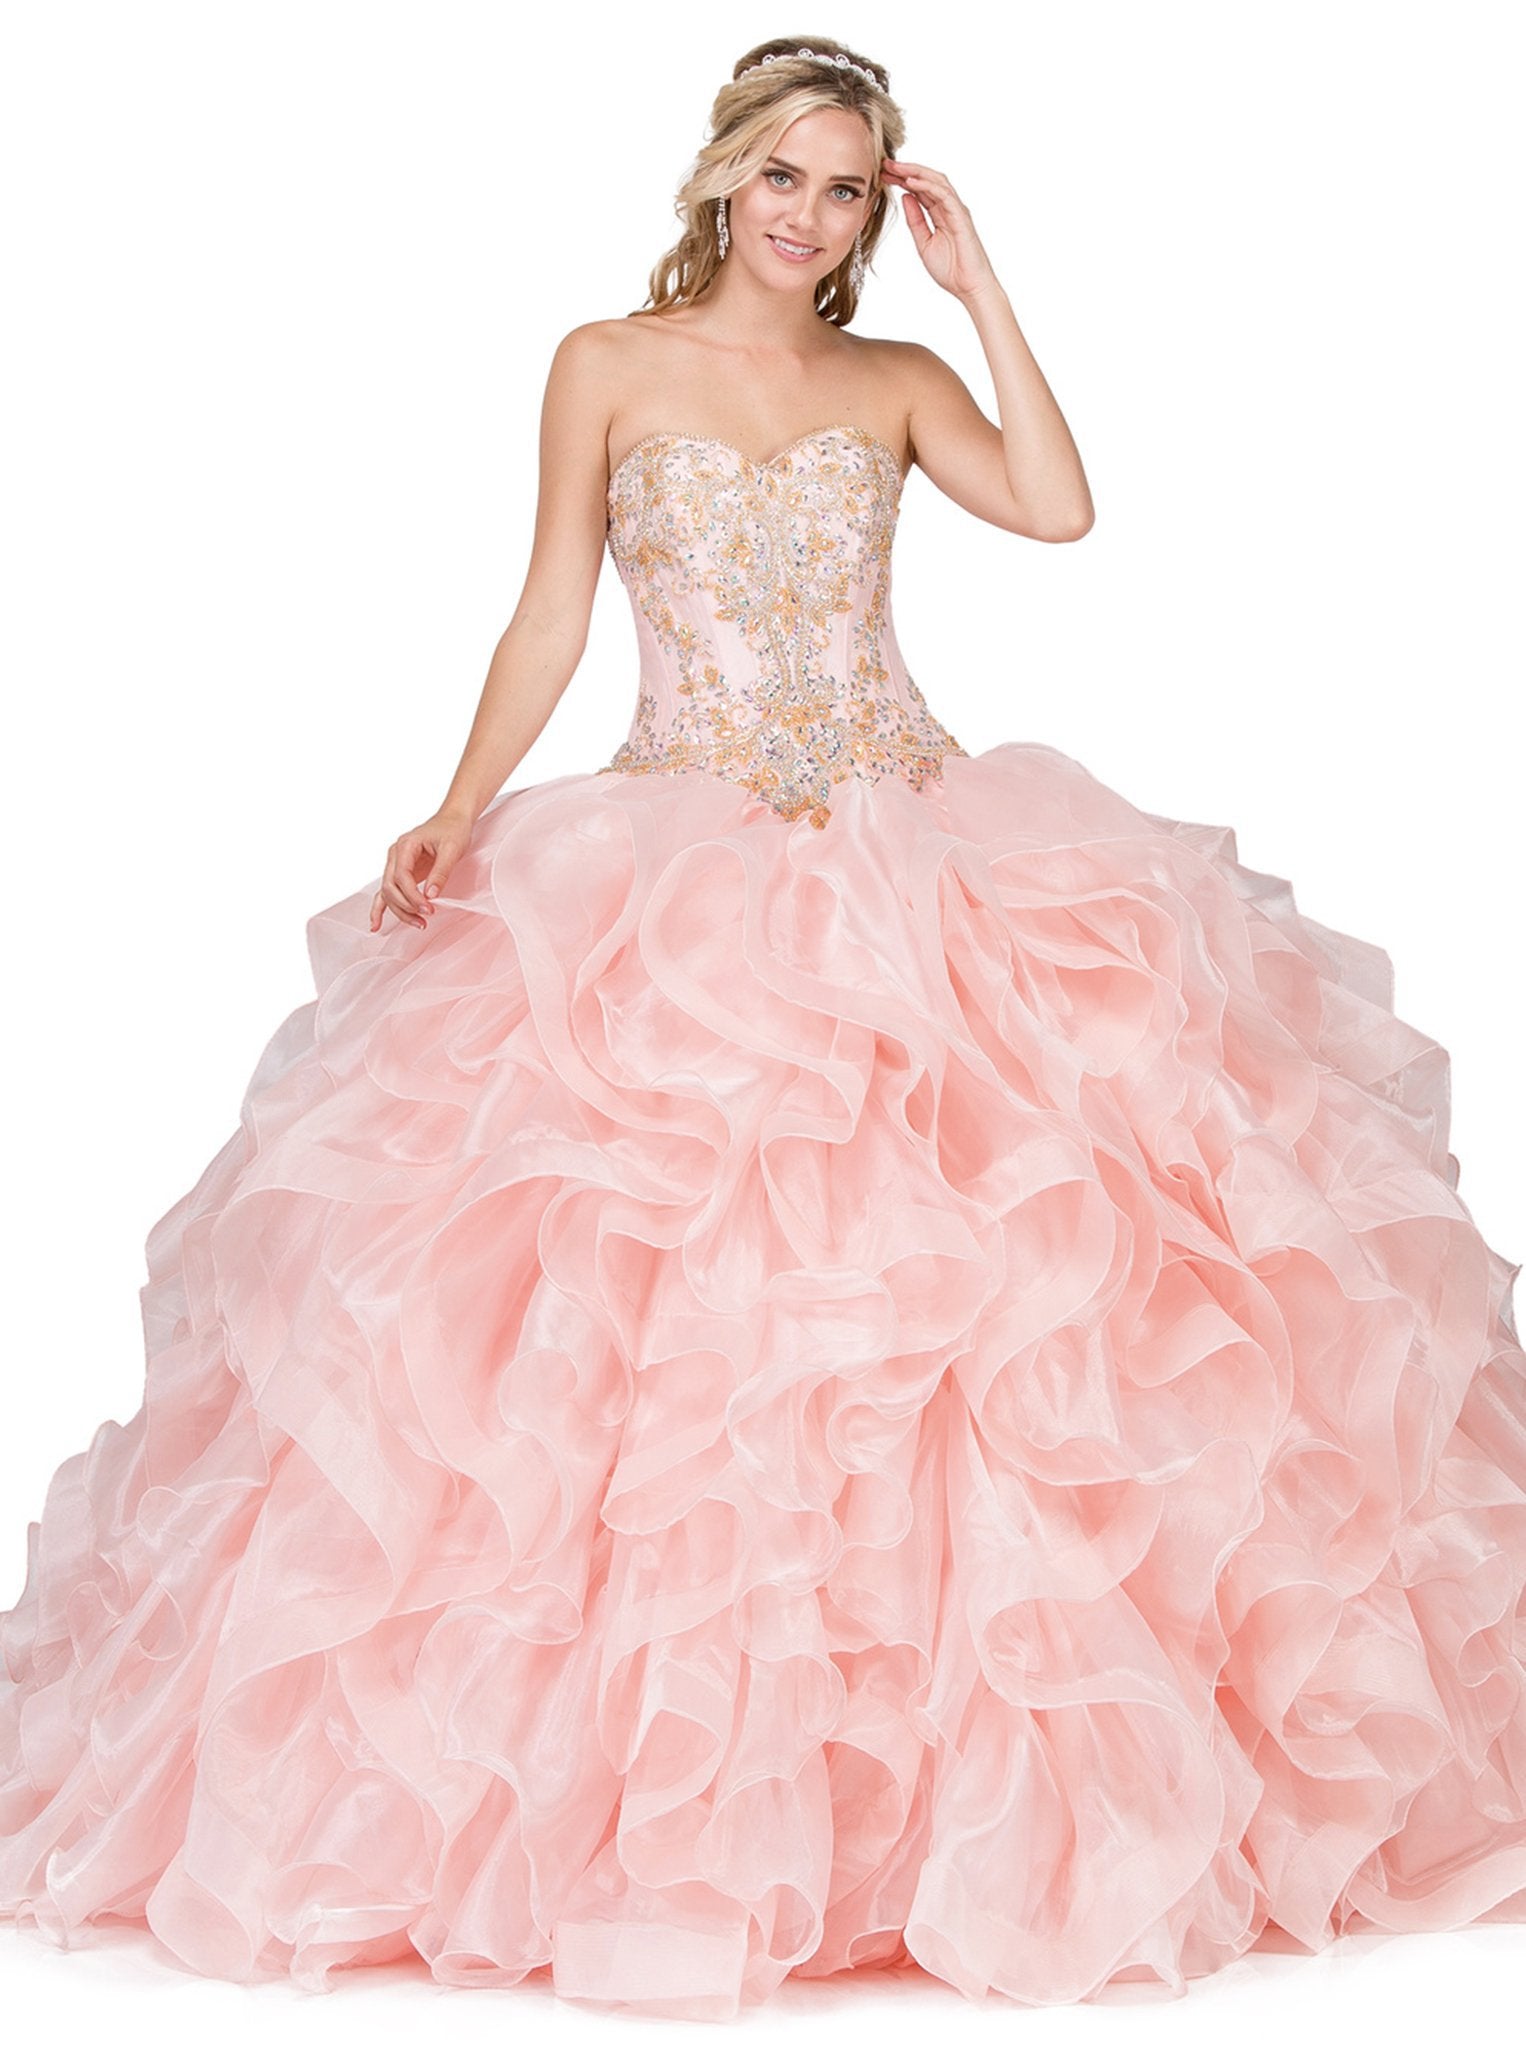 Dancing Queen - 1250 Strapless Embroidered Ruffled Quinceanera Gown